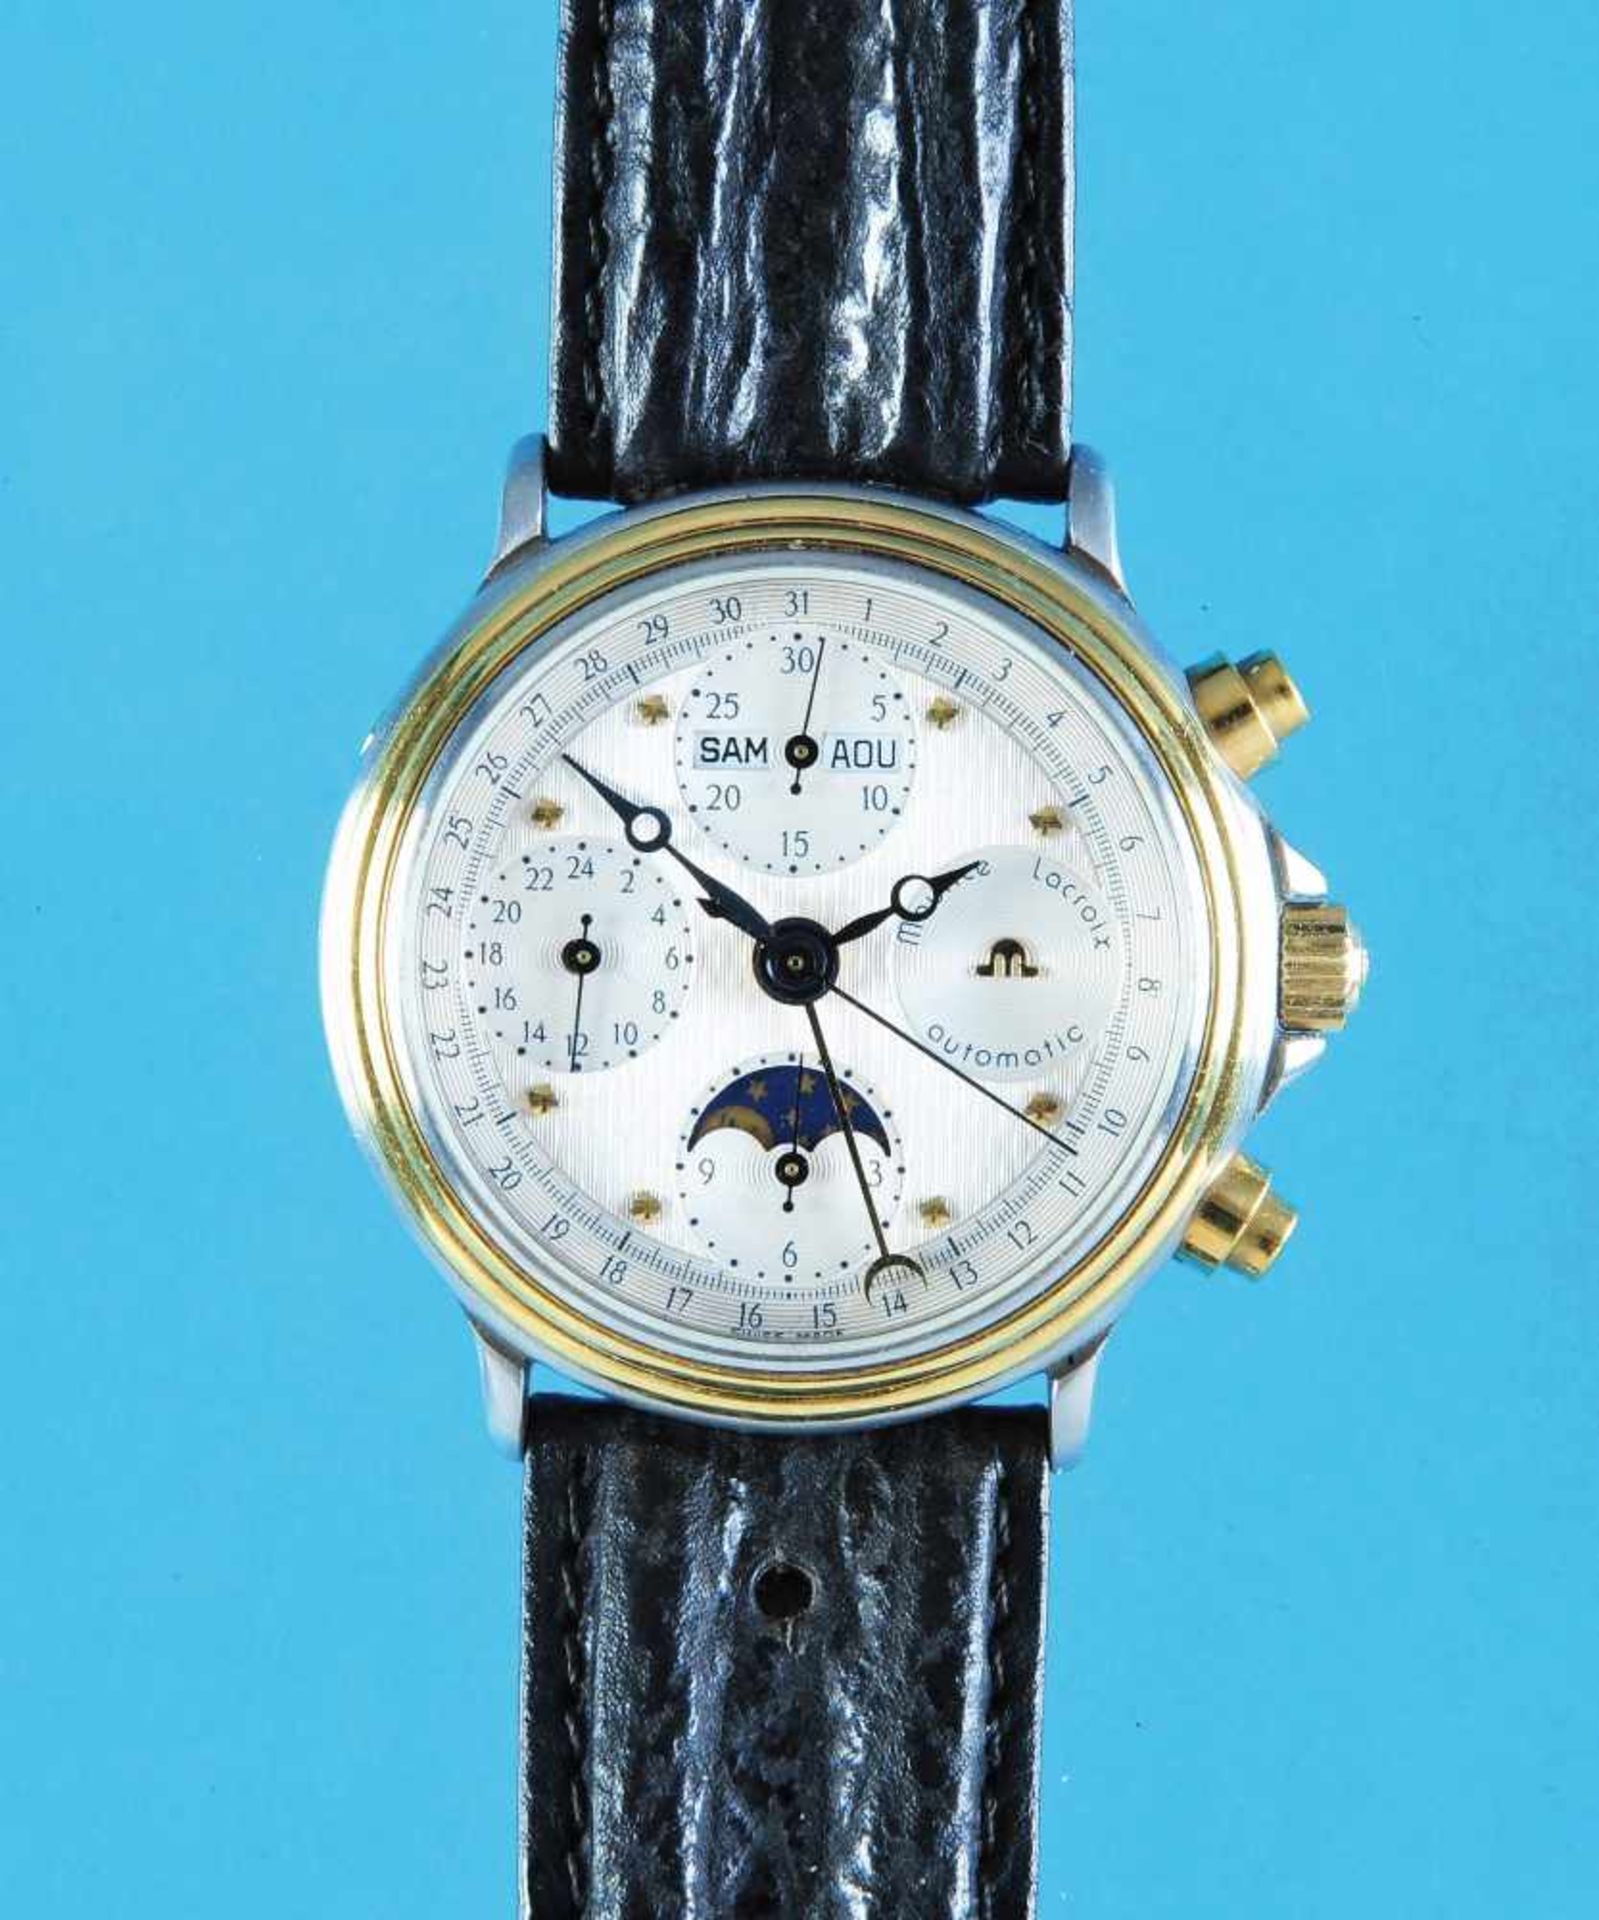 Gold-plated steel wristwatch with chronograph and moonphase calendar, Maurice Lacroix